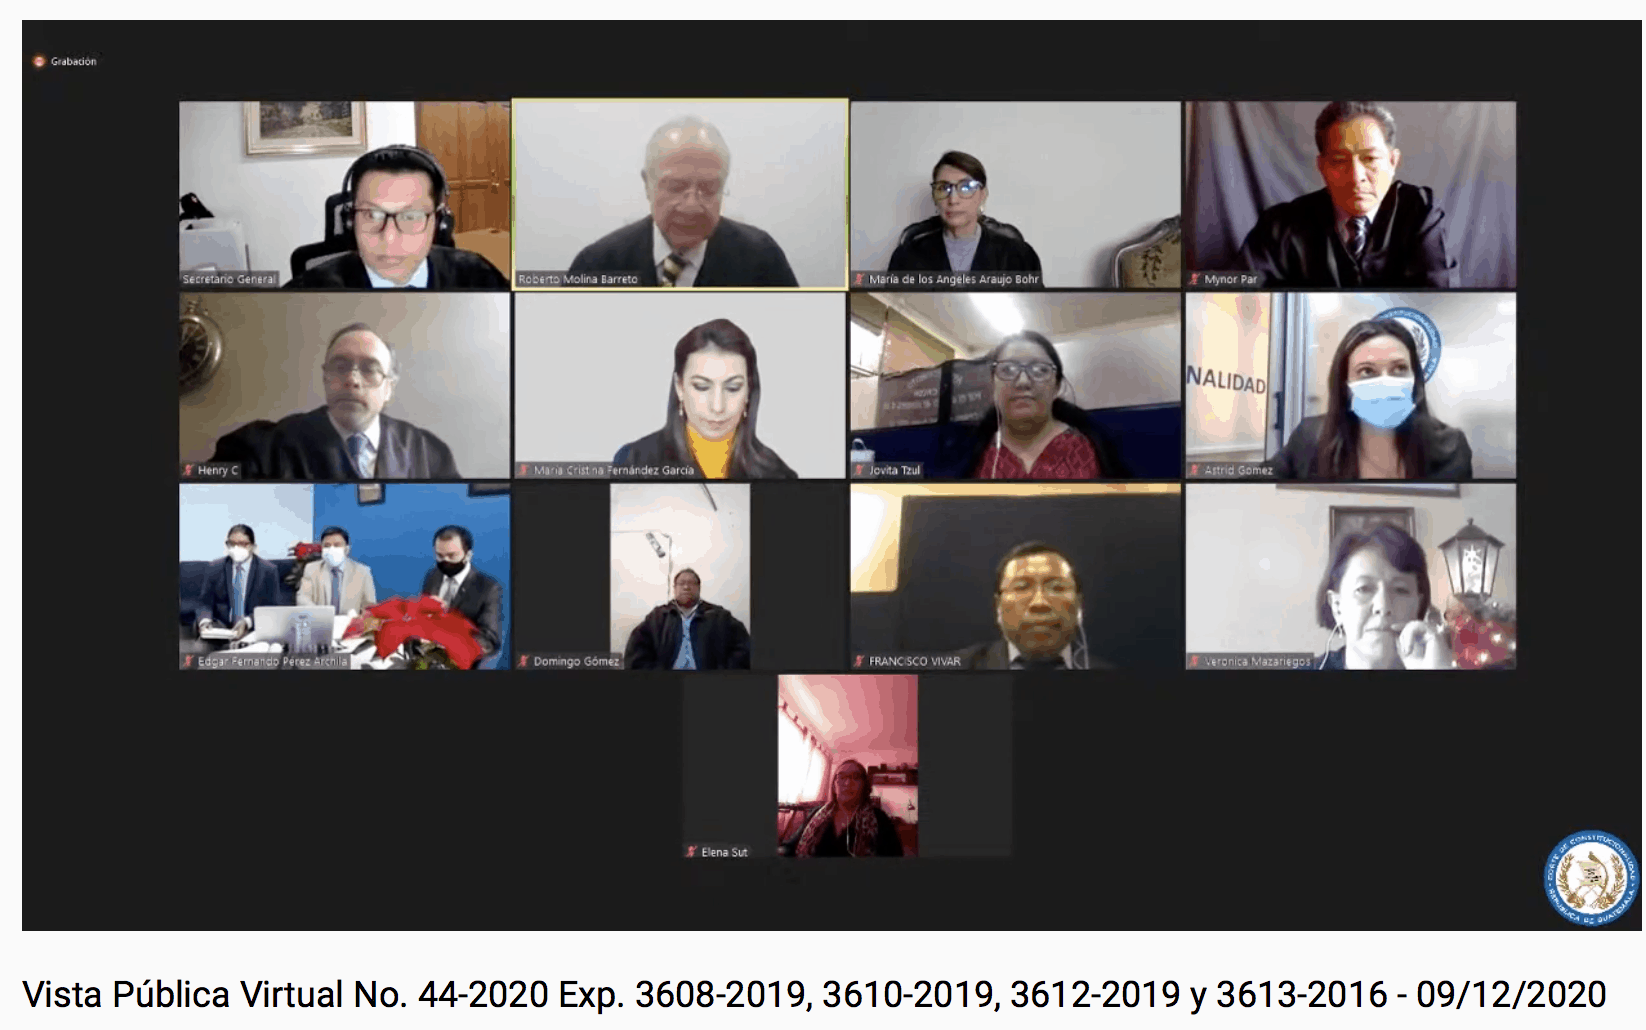 In the image there are a lot of faces of lawyers both men and women using zoom platform